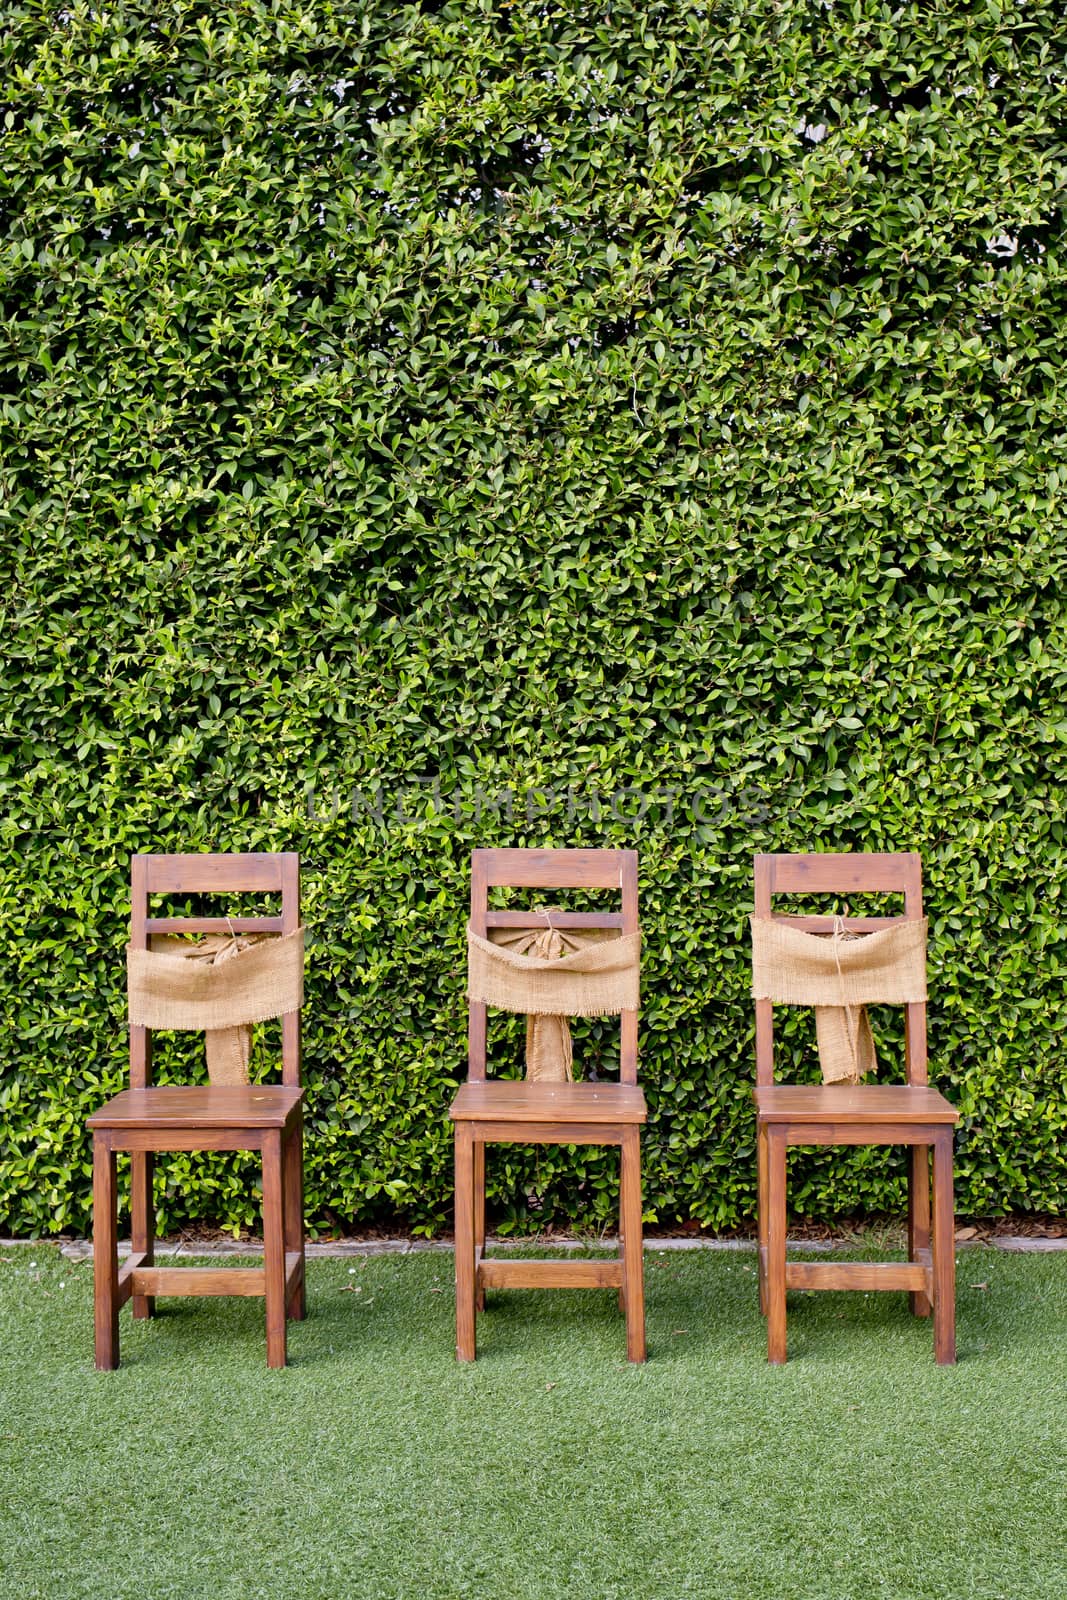 Decorate three wooden chairs against the green small tree wall.